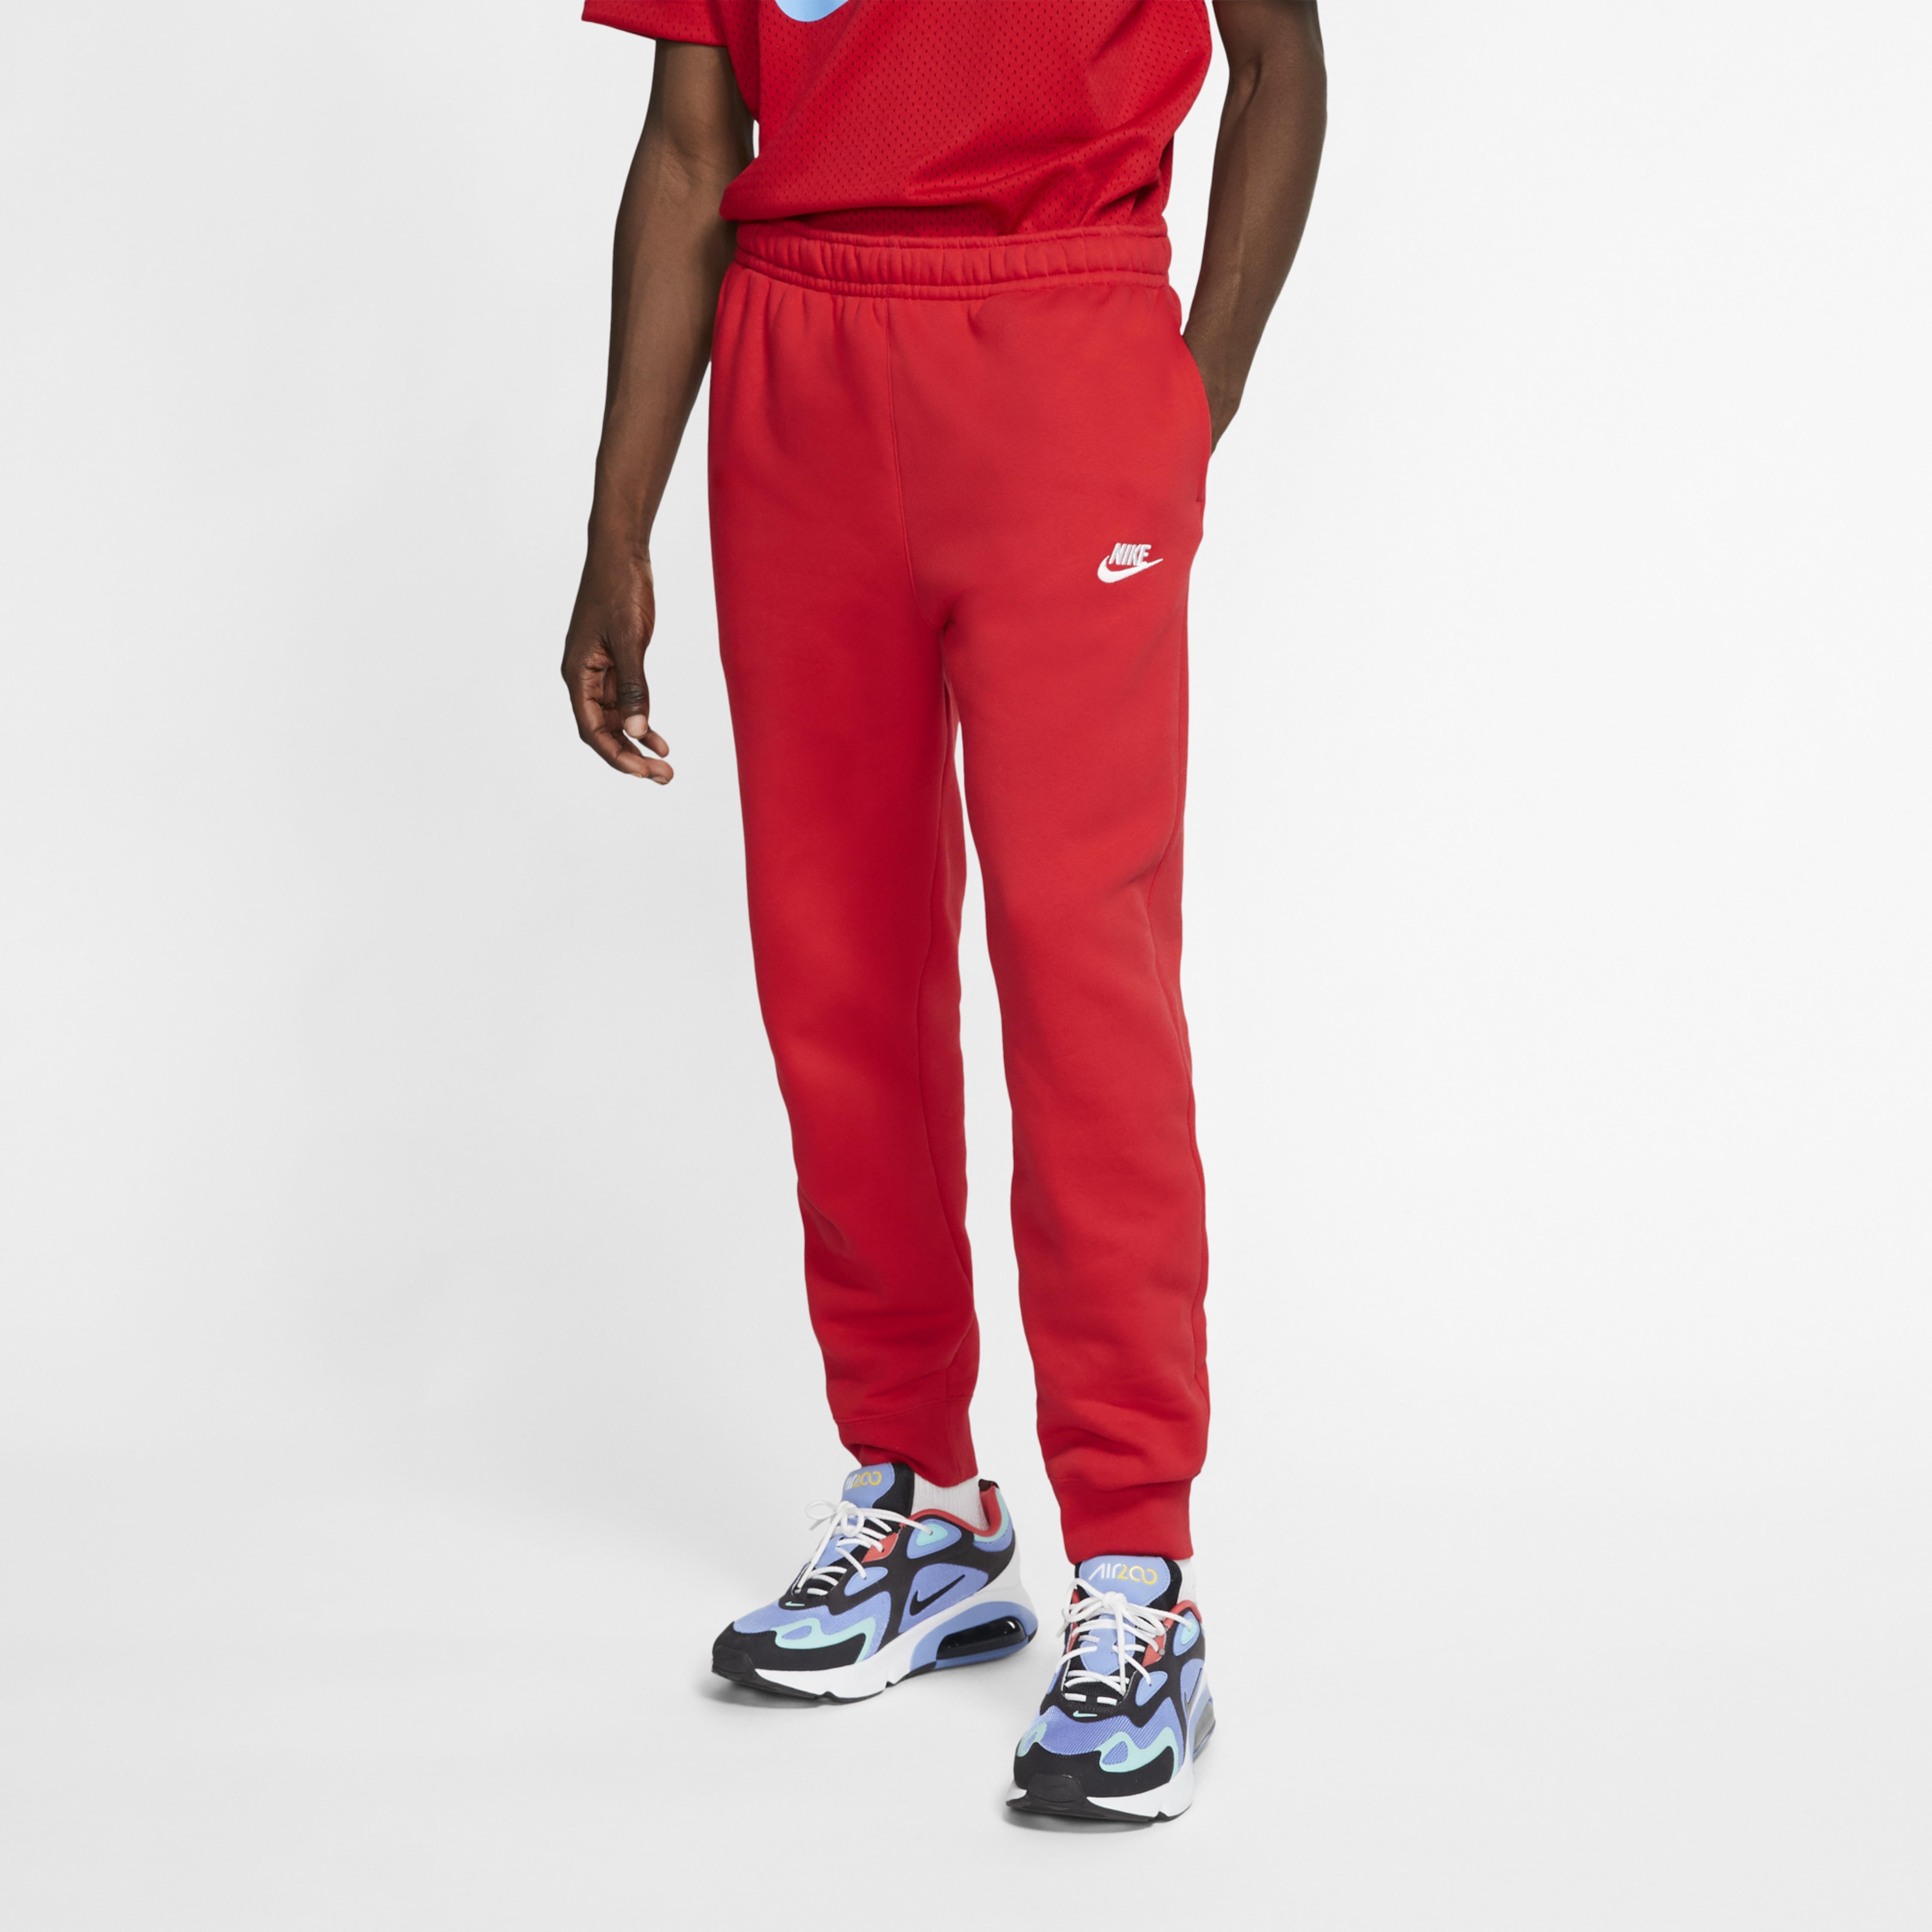 Nike Fleece Club joggers in University Red/White (Red) for Men - Lyst